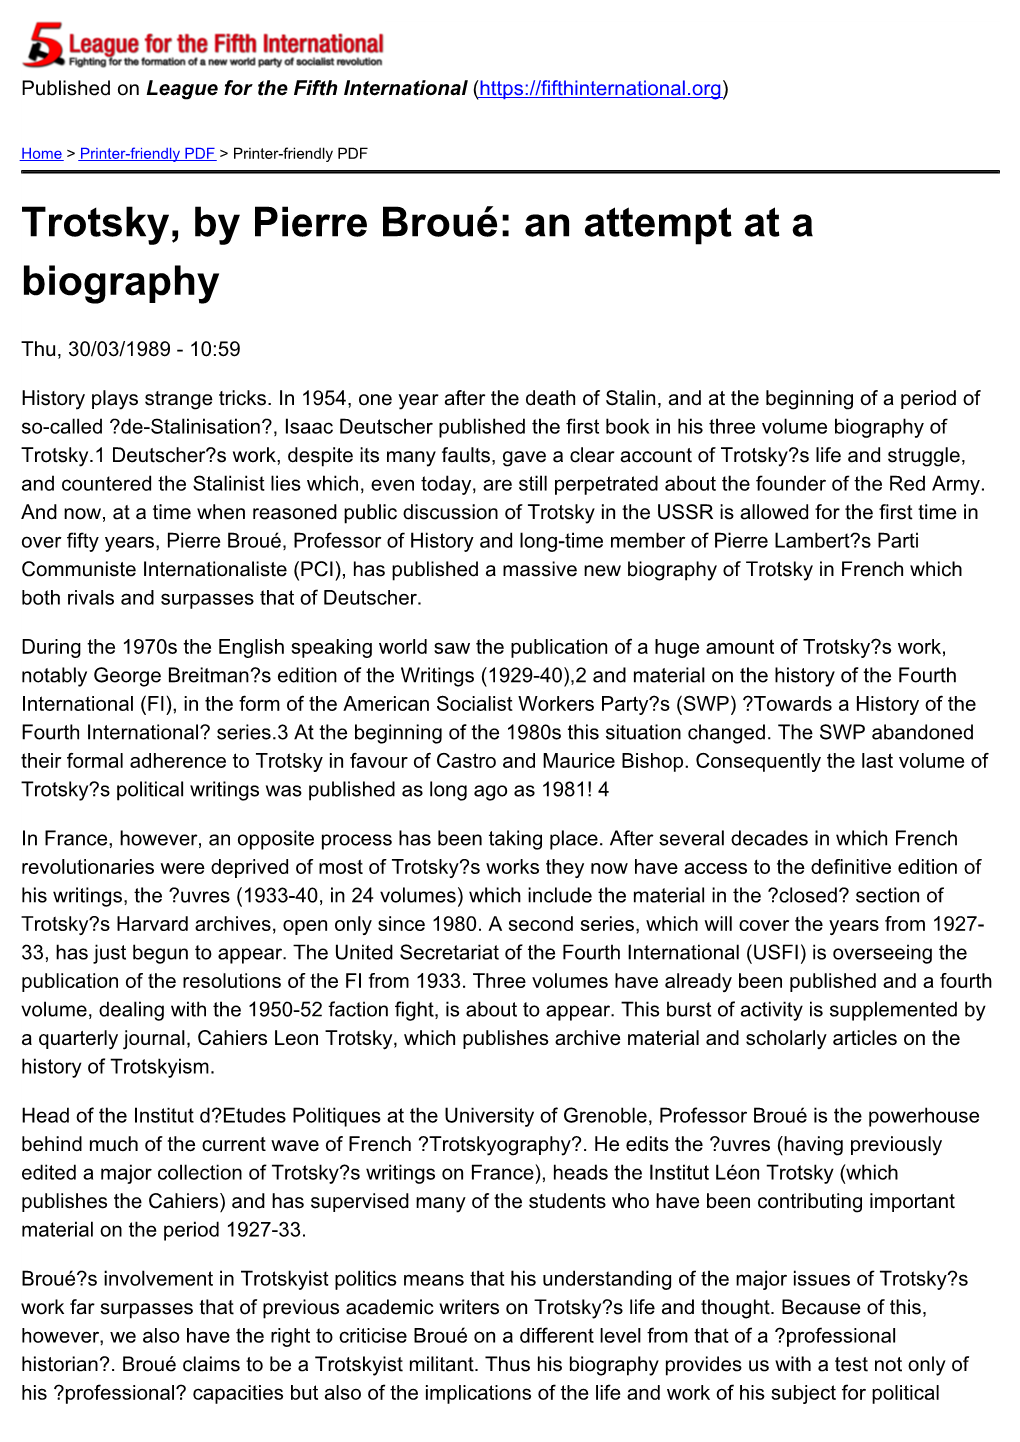 Trotsky, by Pierre Broué: an Attempt at a Biography